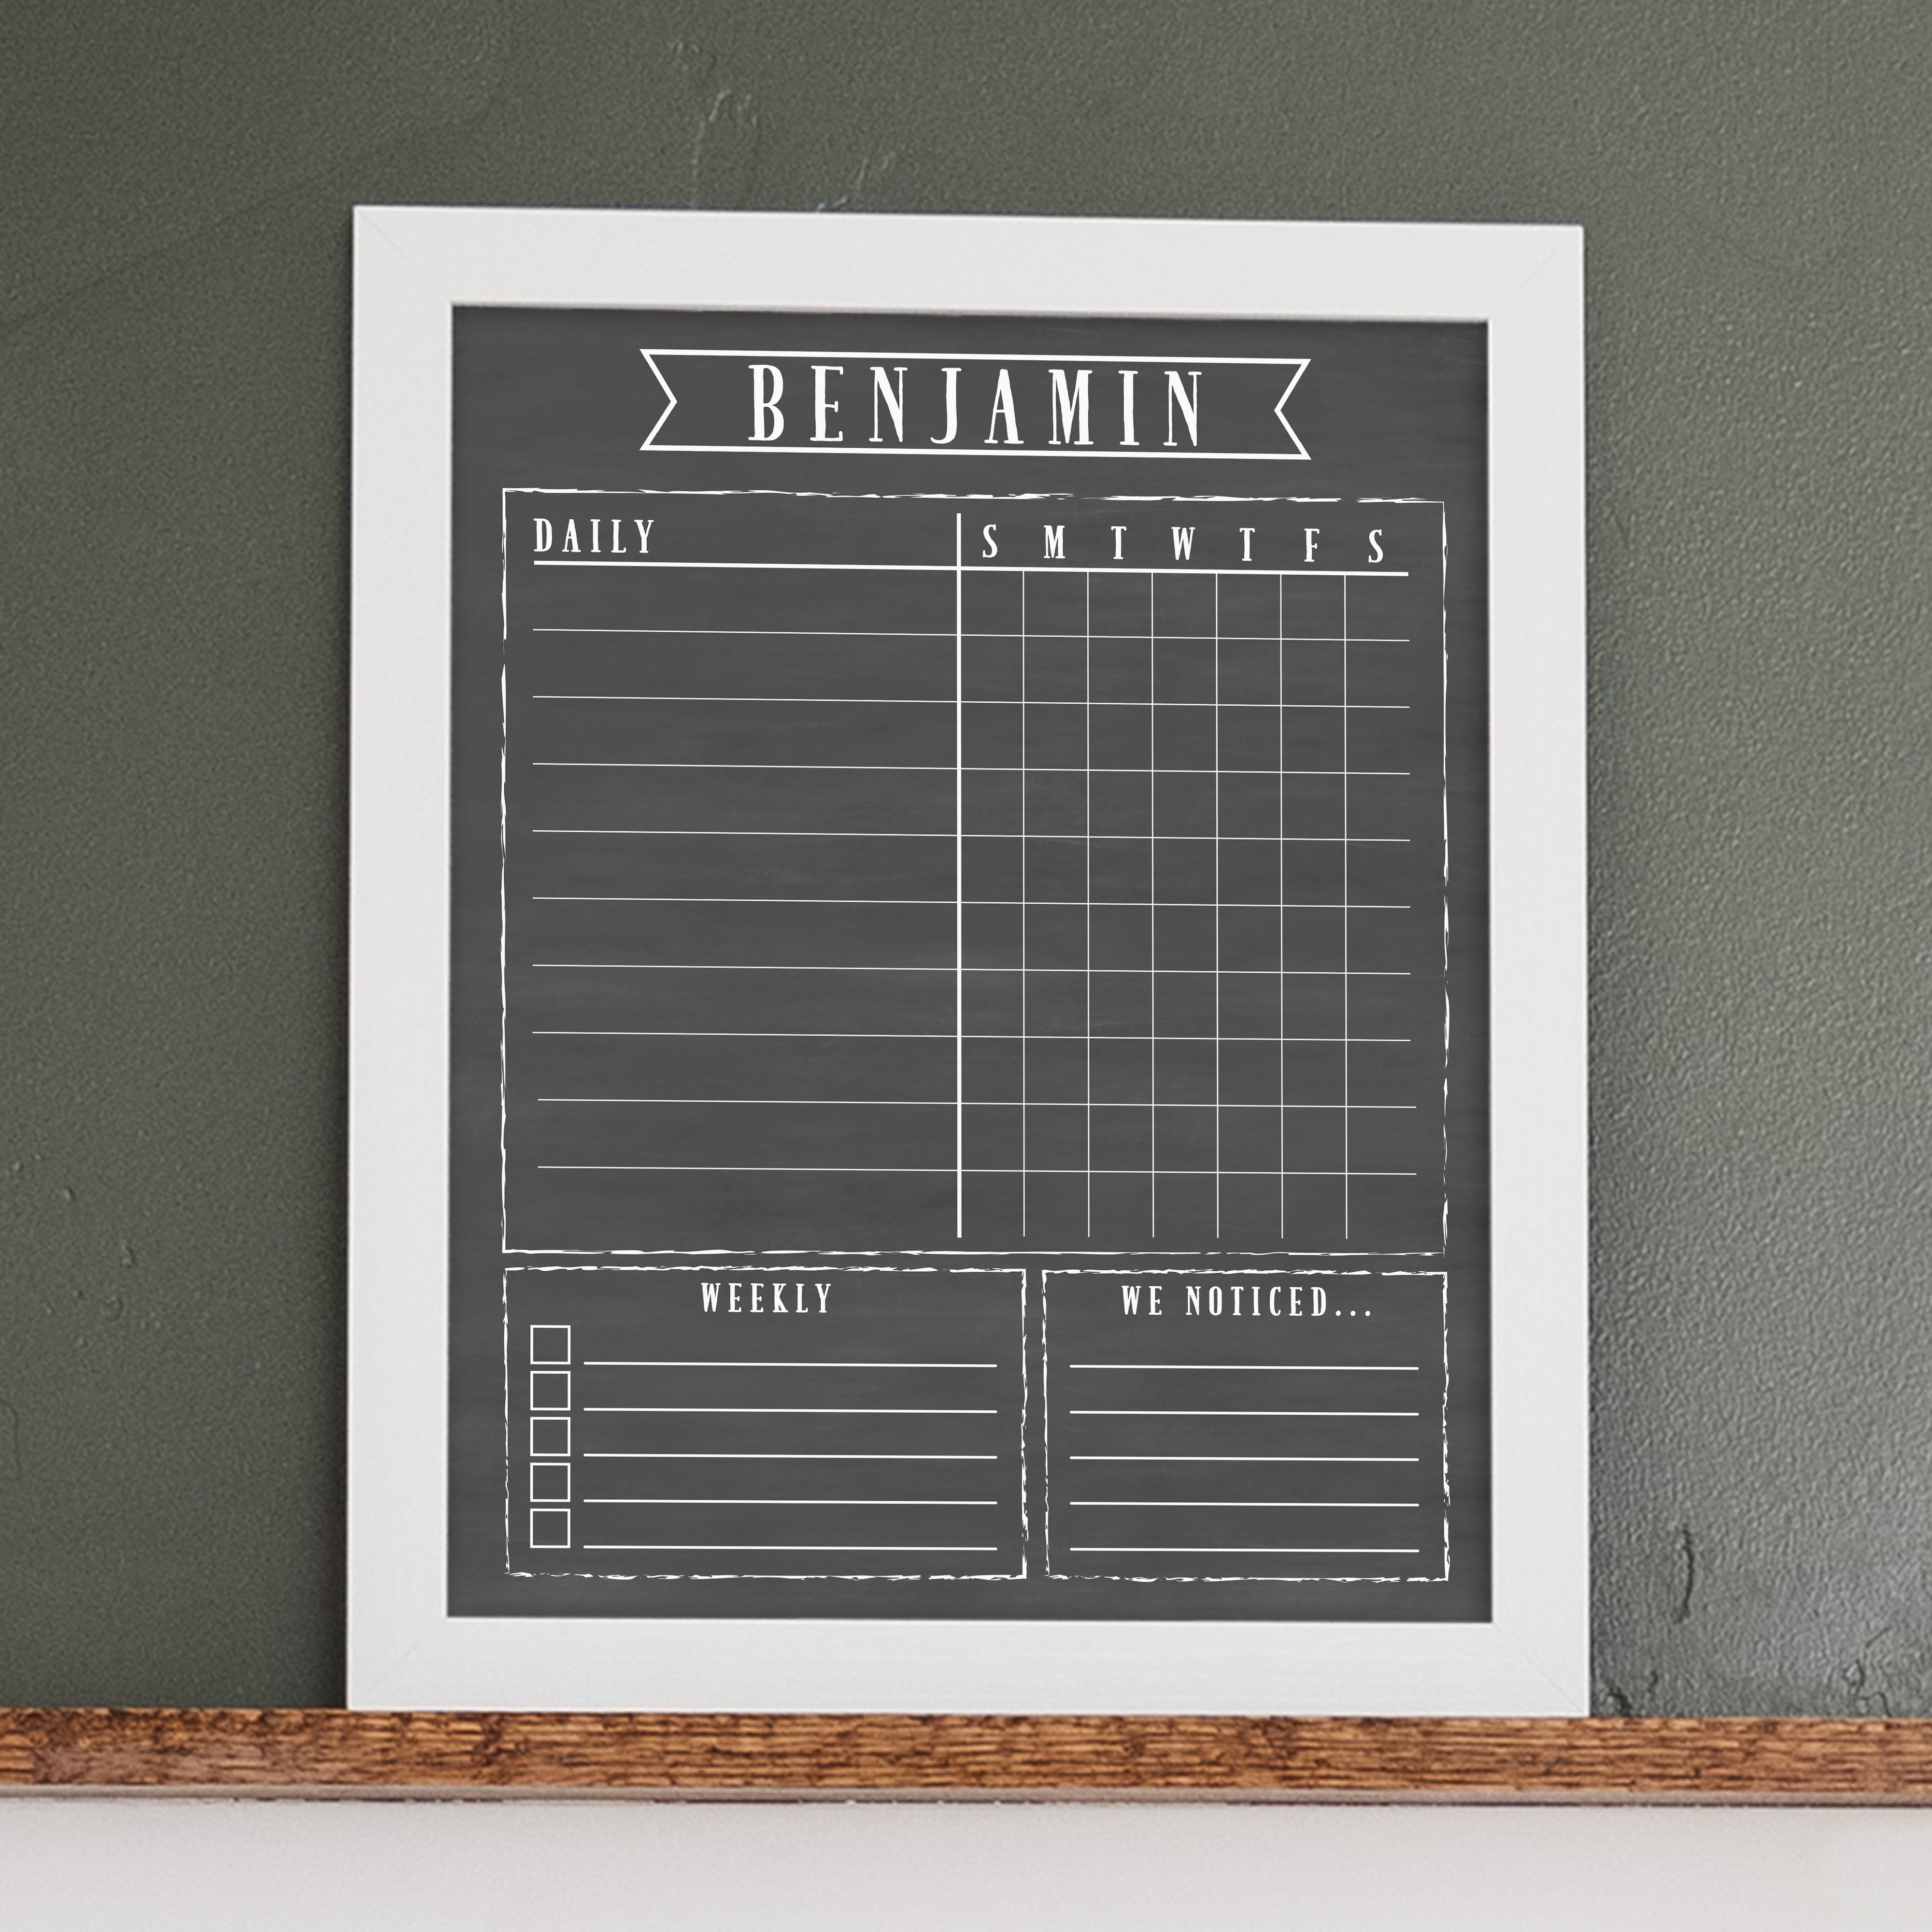 A framed dry-erase chore chart with a chalkboard look hanging on the wall